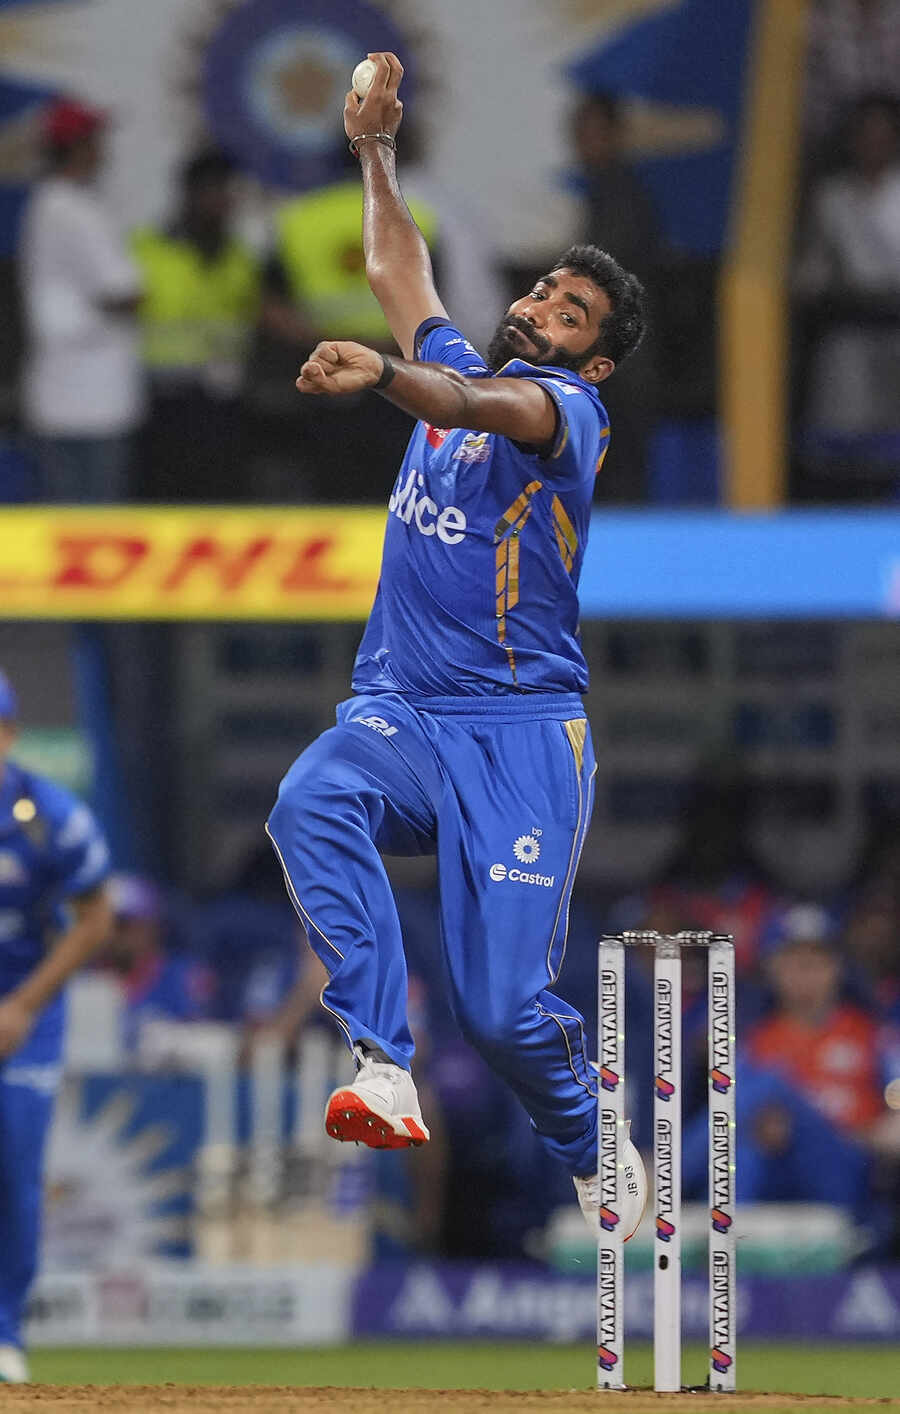 Jasprit Bumrah (MI): Even though MI are no longer in contention for the playoffs, their spearhead is a gift that keeps on giving. Three for 18 off against KKR and another tight spell of one for 23 versus SRH meant Bumrah kept his wonderful track record at the Wankhede intact. Outstanding at the death against KKR, Bumrah was almost as economical against SRH in what are fantastic signs for India ahead of the T20 World Cup 